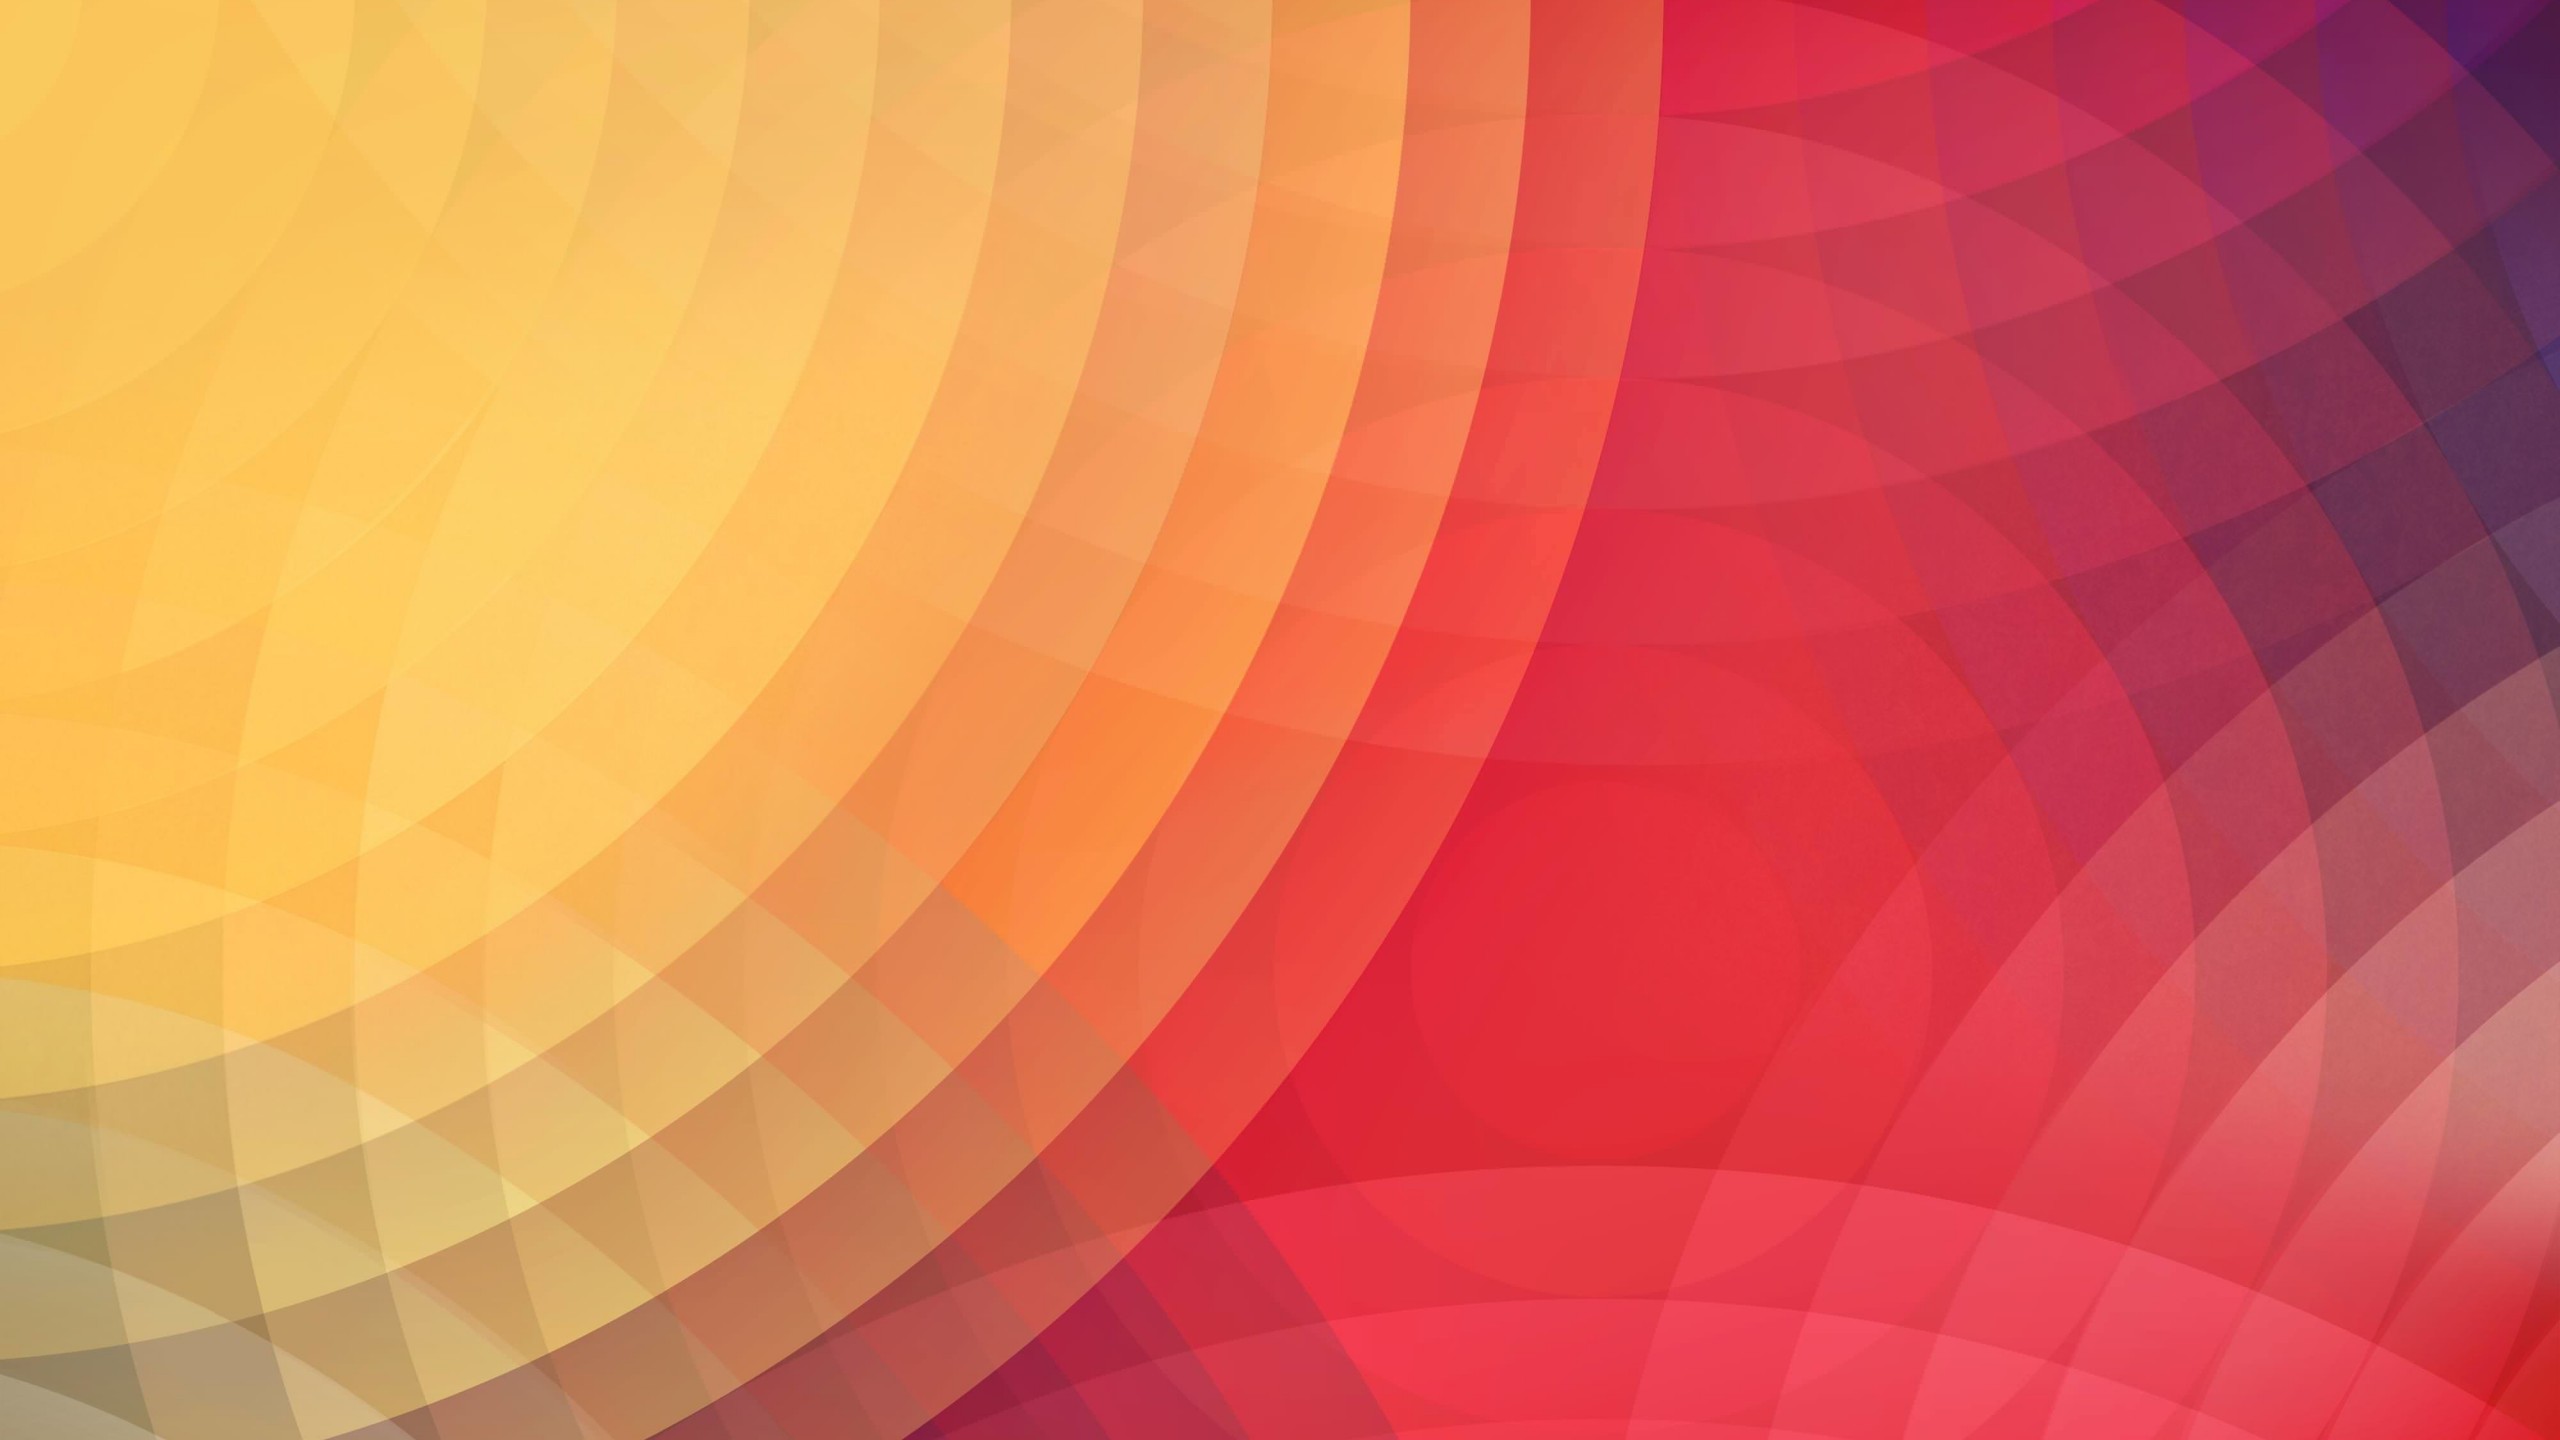 Abstract Circles Wallpaper for Social Media YouTube Channel Art